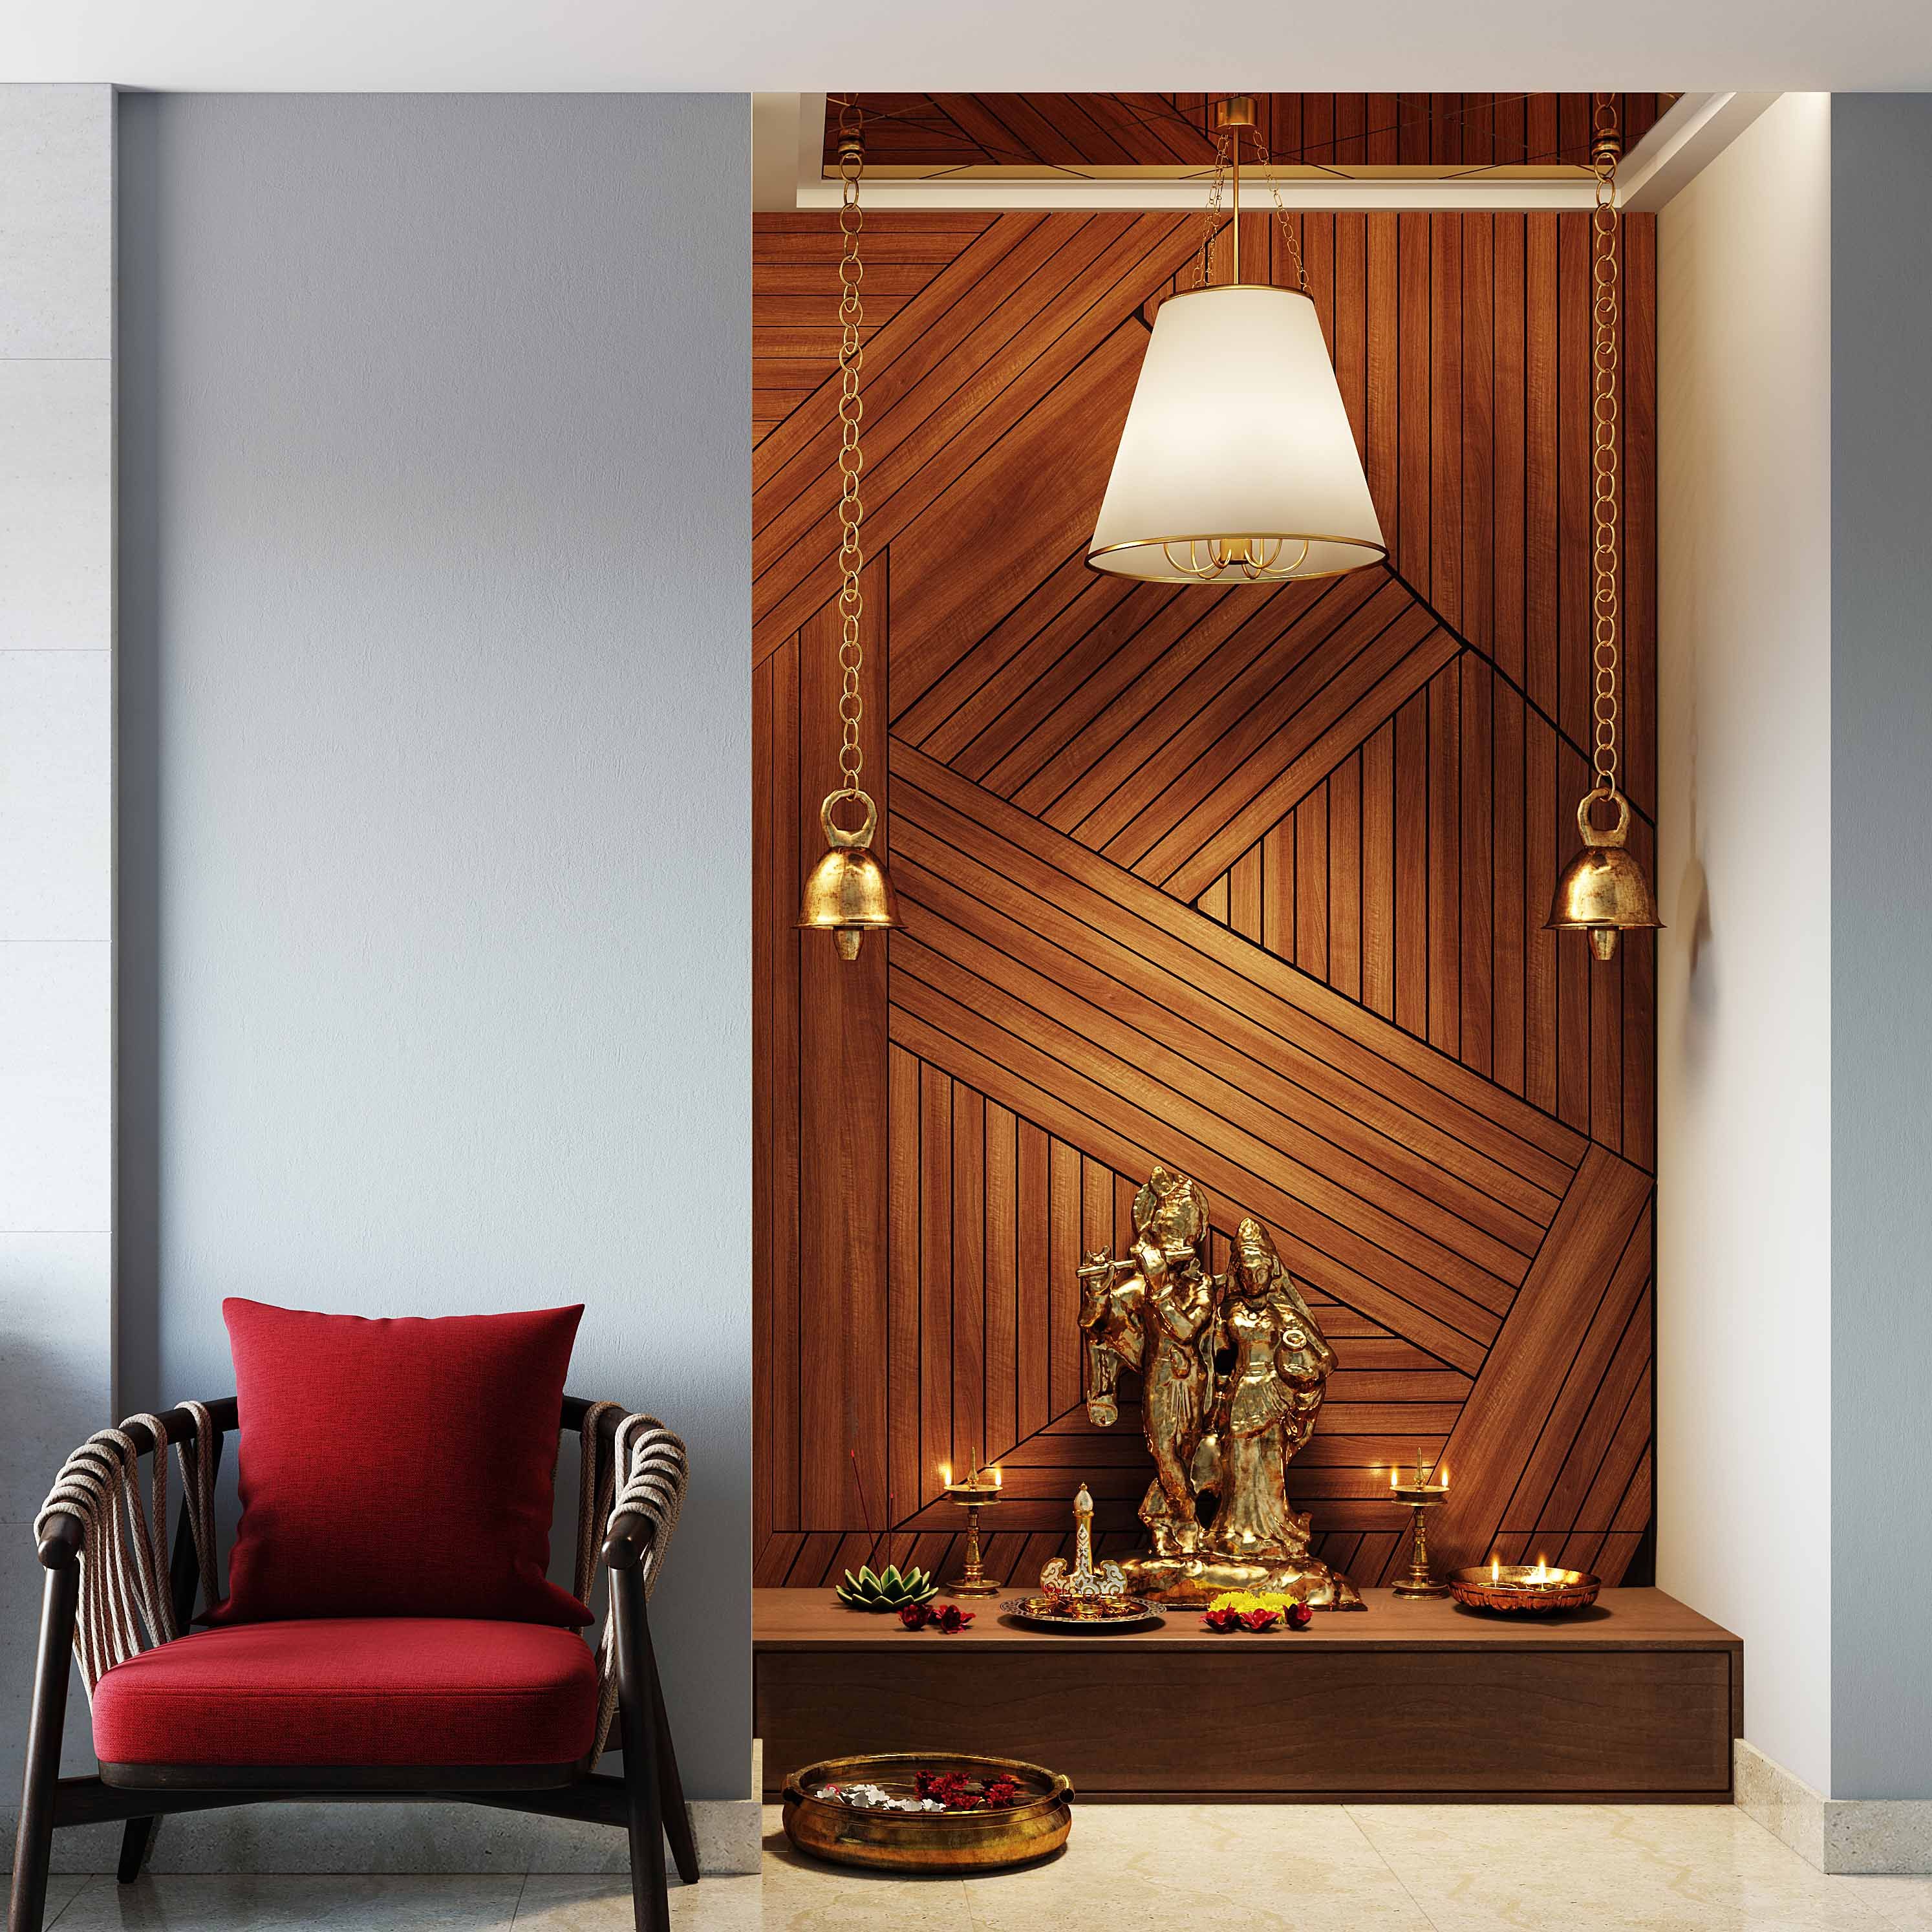 Indian Traditional Wall Design With Wooden Wall Panelling For Pooja Rooms